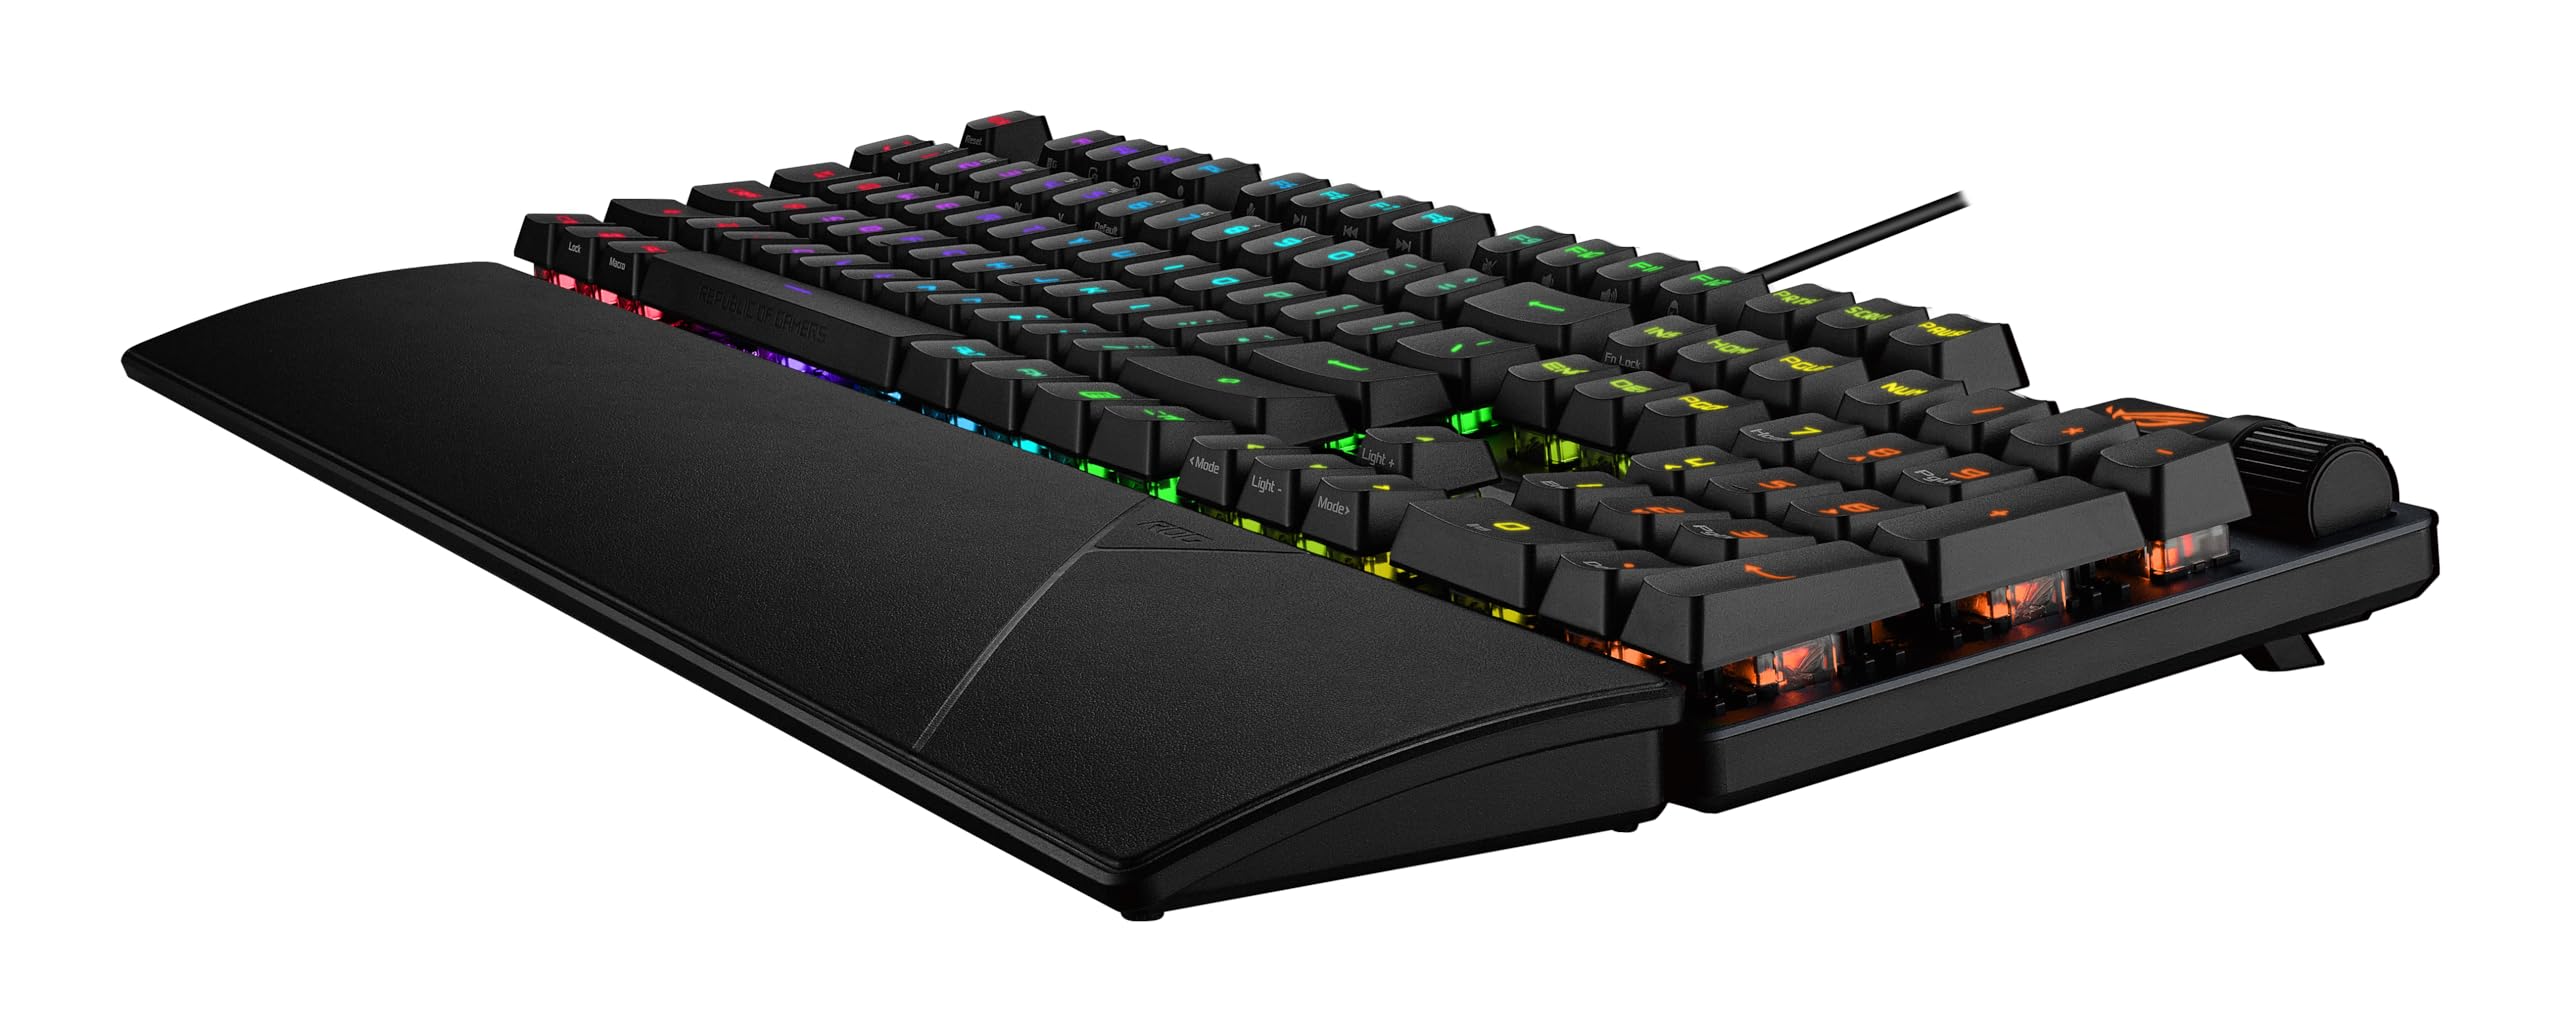 ASUS ROG Strix Scope II Gaming Keyboard, pre-lubed ROG RX Red Linear Optical switches, Sound-dampening Foam, PBT doubleshot keycaps, Streaming hotkeys, Multi-Function Controls, Wrist Rest